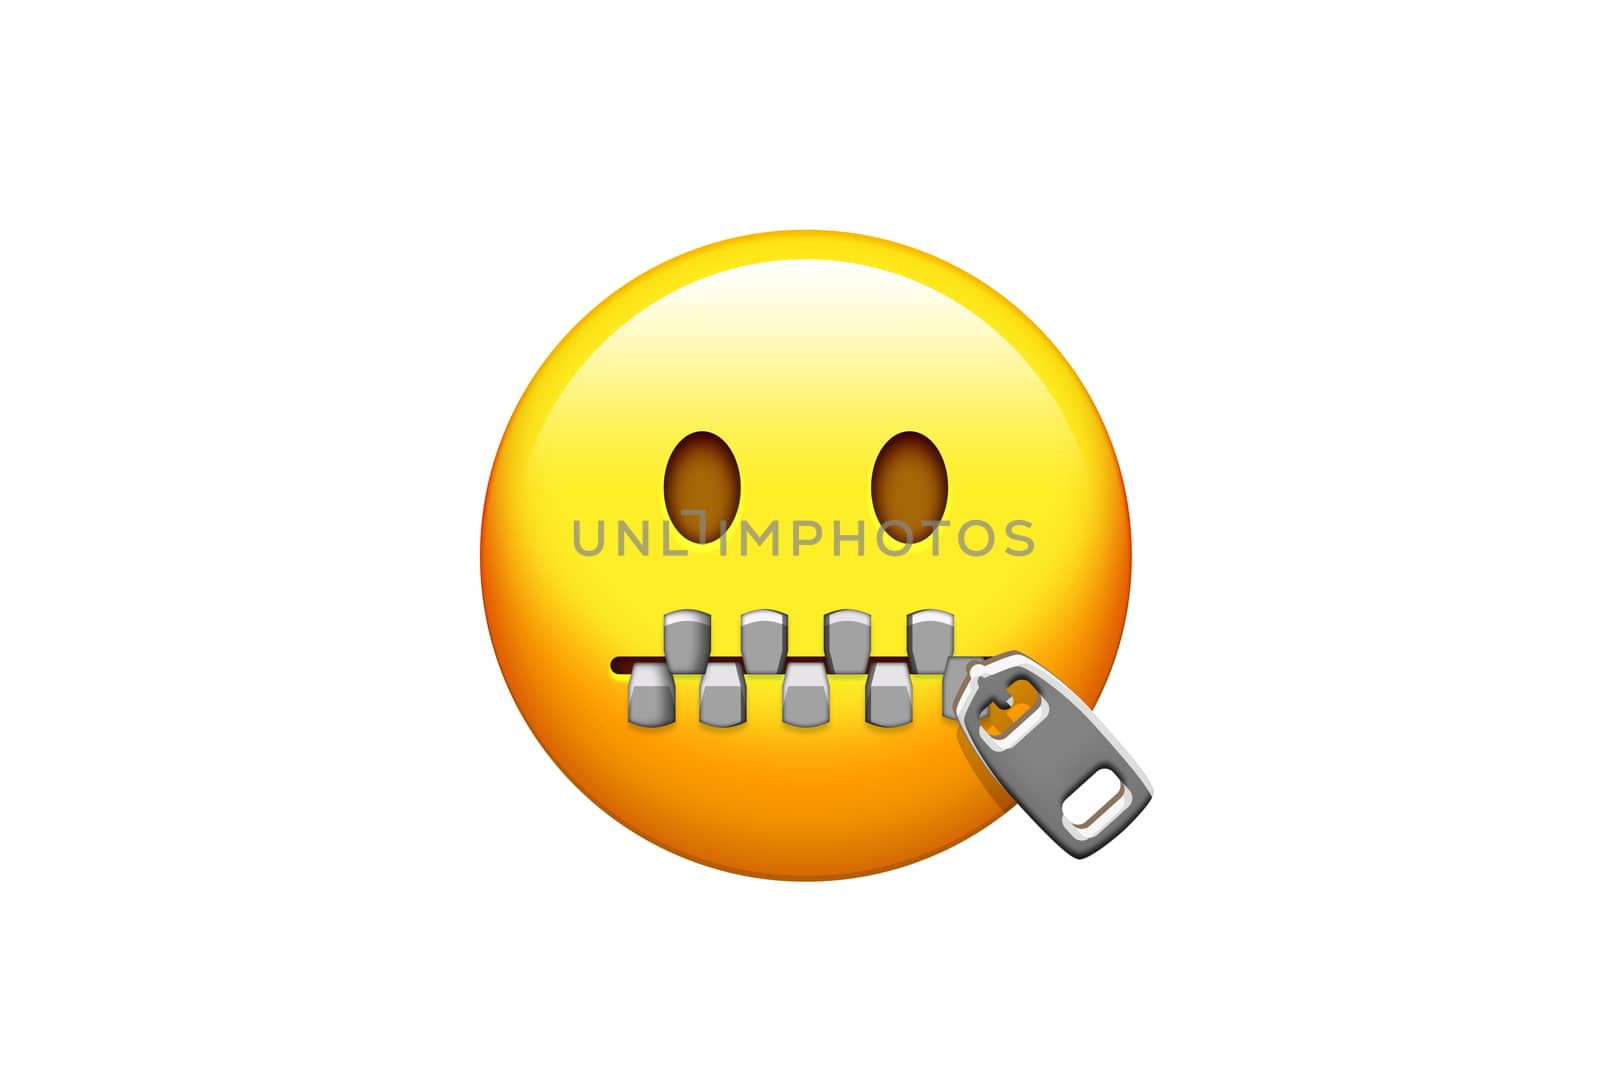 The isolated emoji yellow emotional face and zipped mouth icon